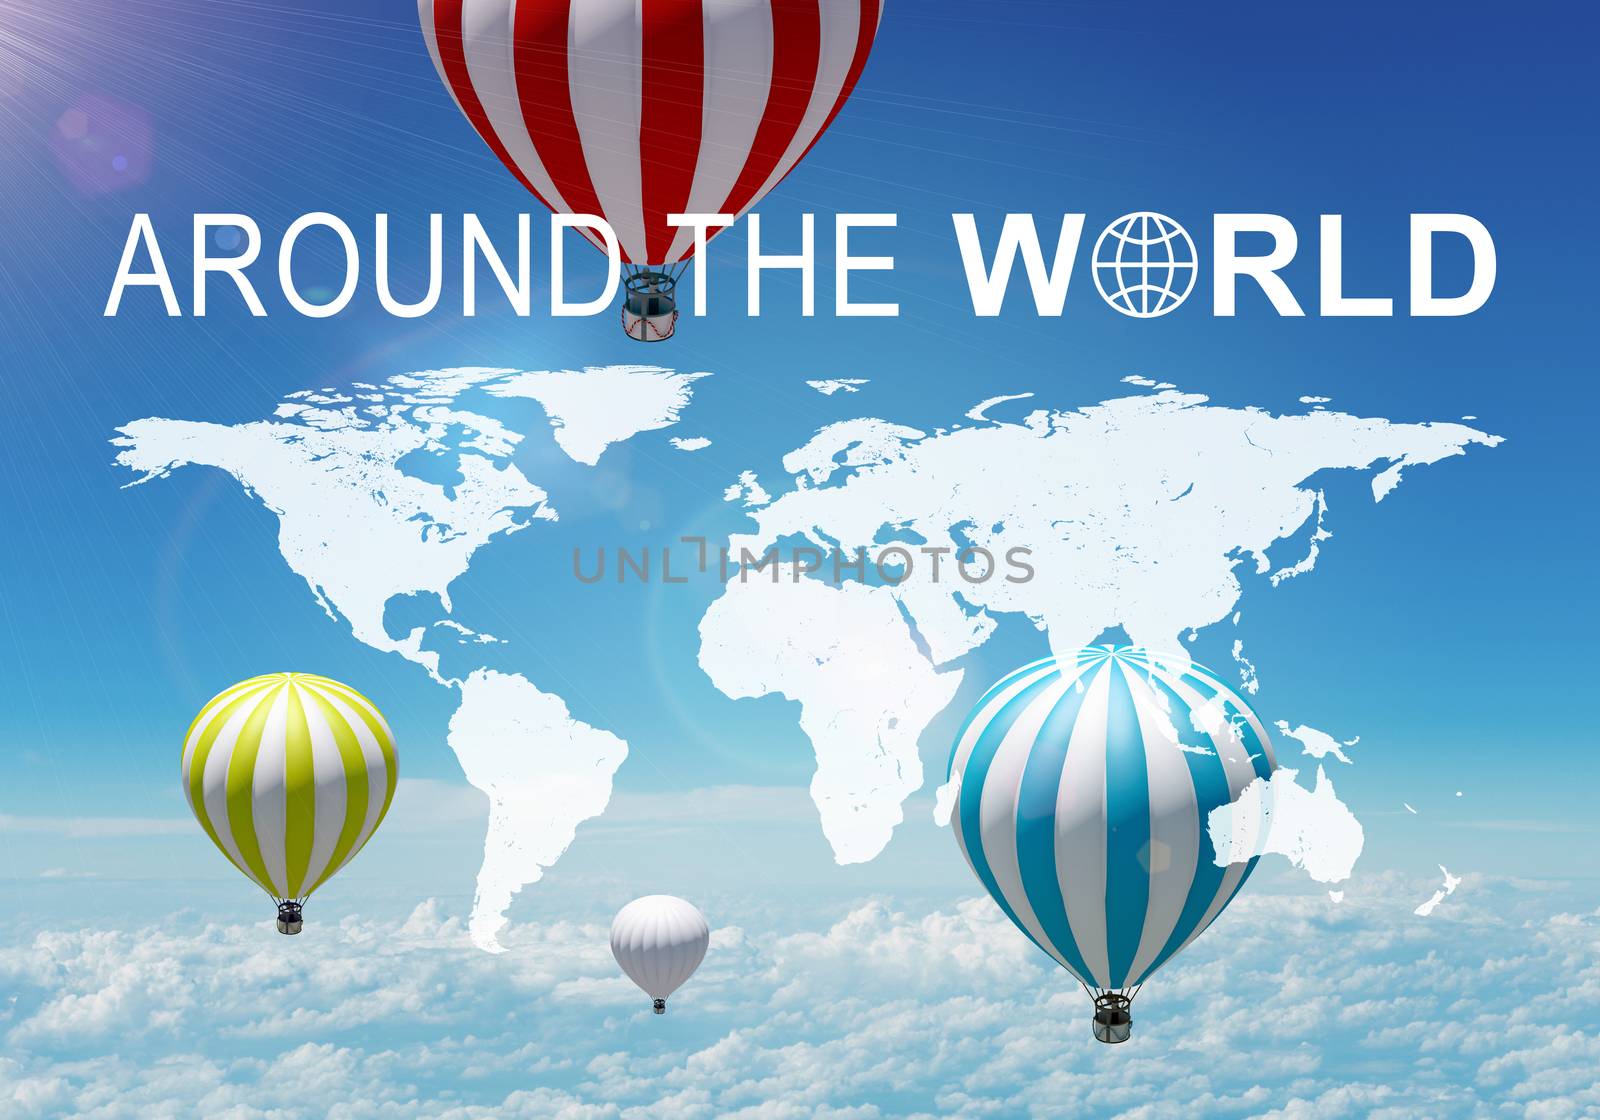 Contoured map of world continents with inscription Around The World and related symbol. Aerial view of a few air baloons, sky and cloud layer as backdrop